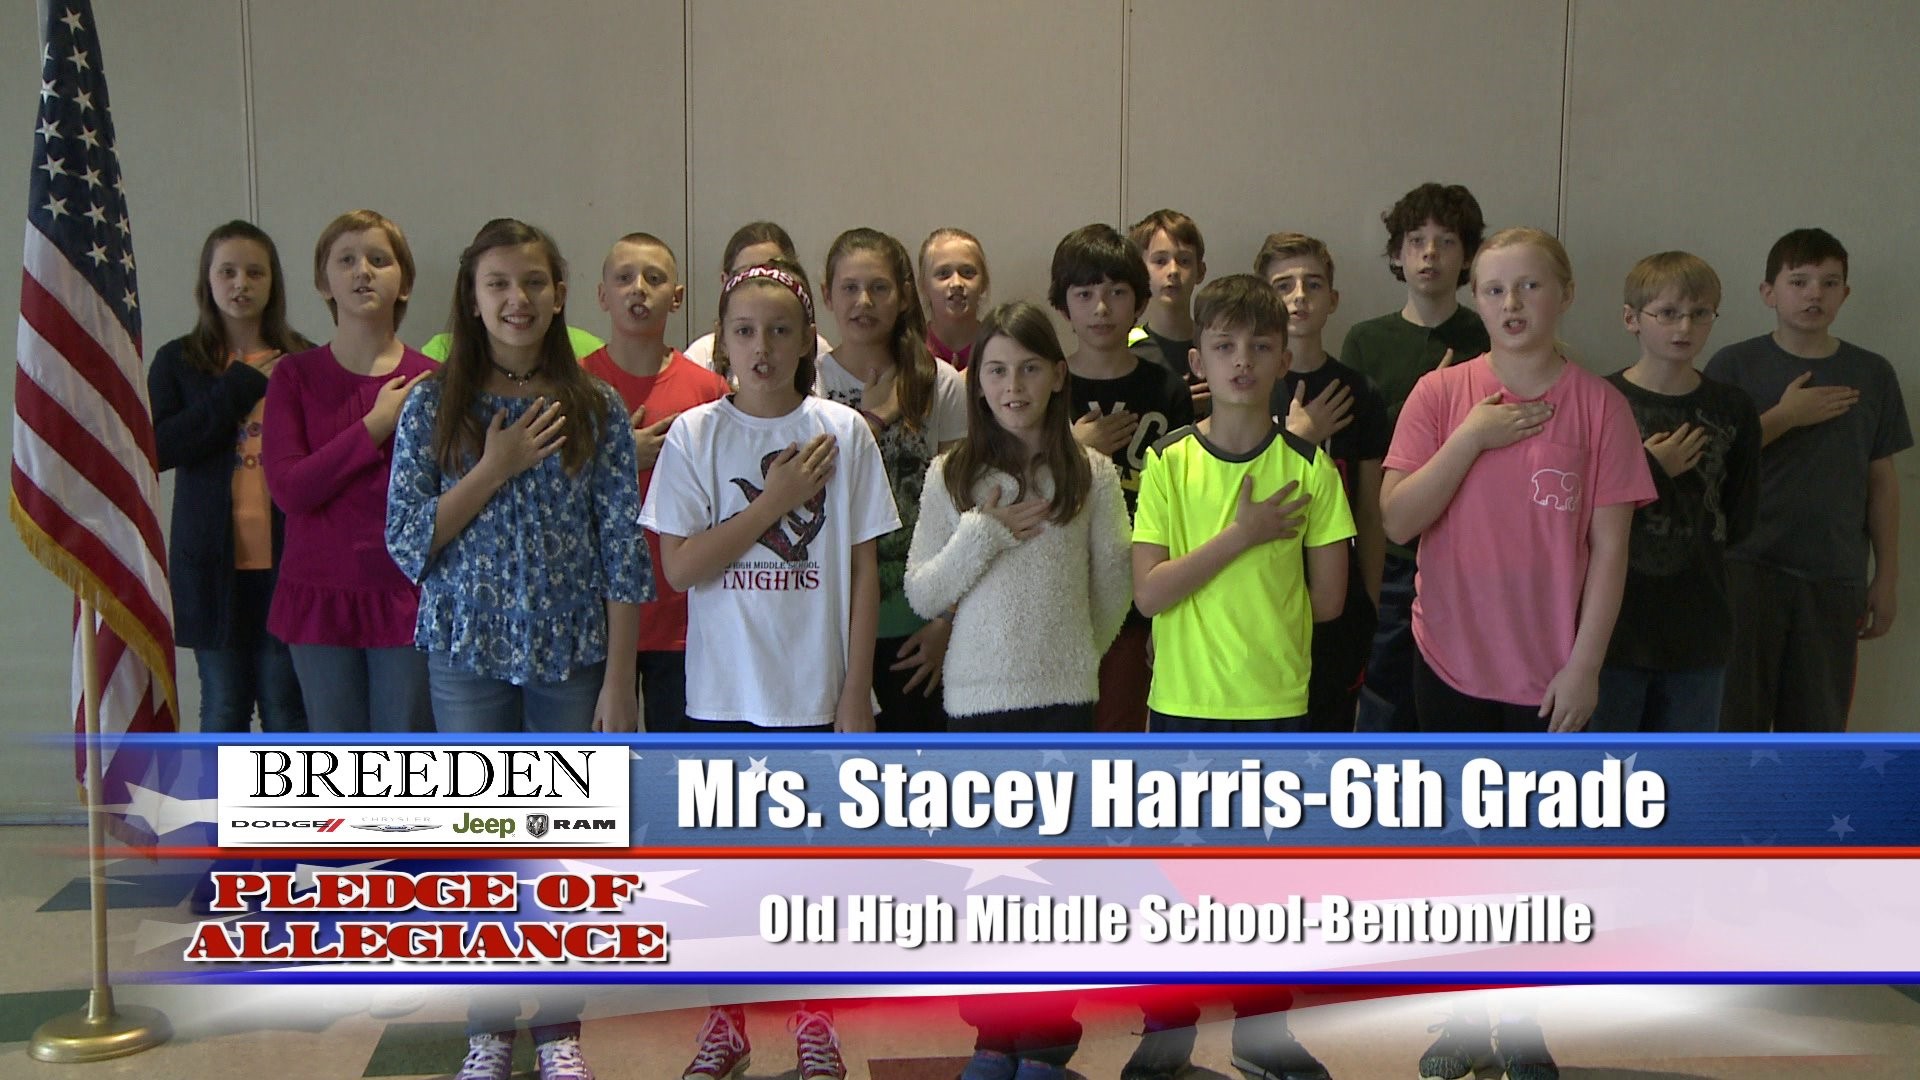 Mrs. Stacey Karris - 6th Grade  Old High Middle School - Bentonville